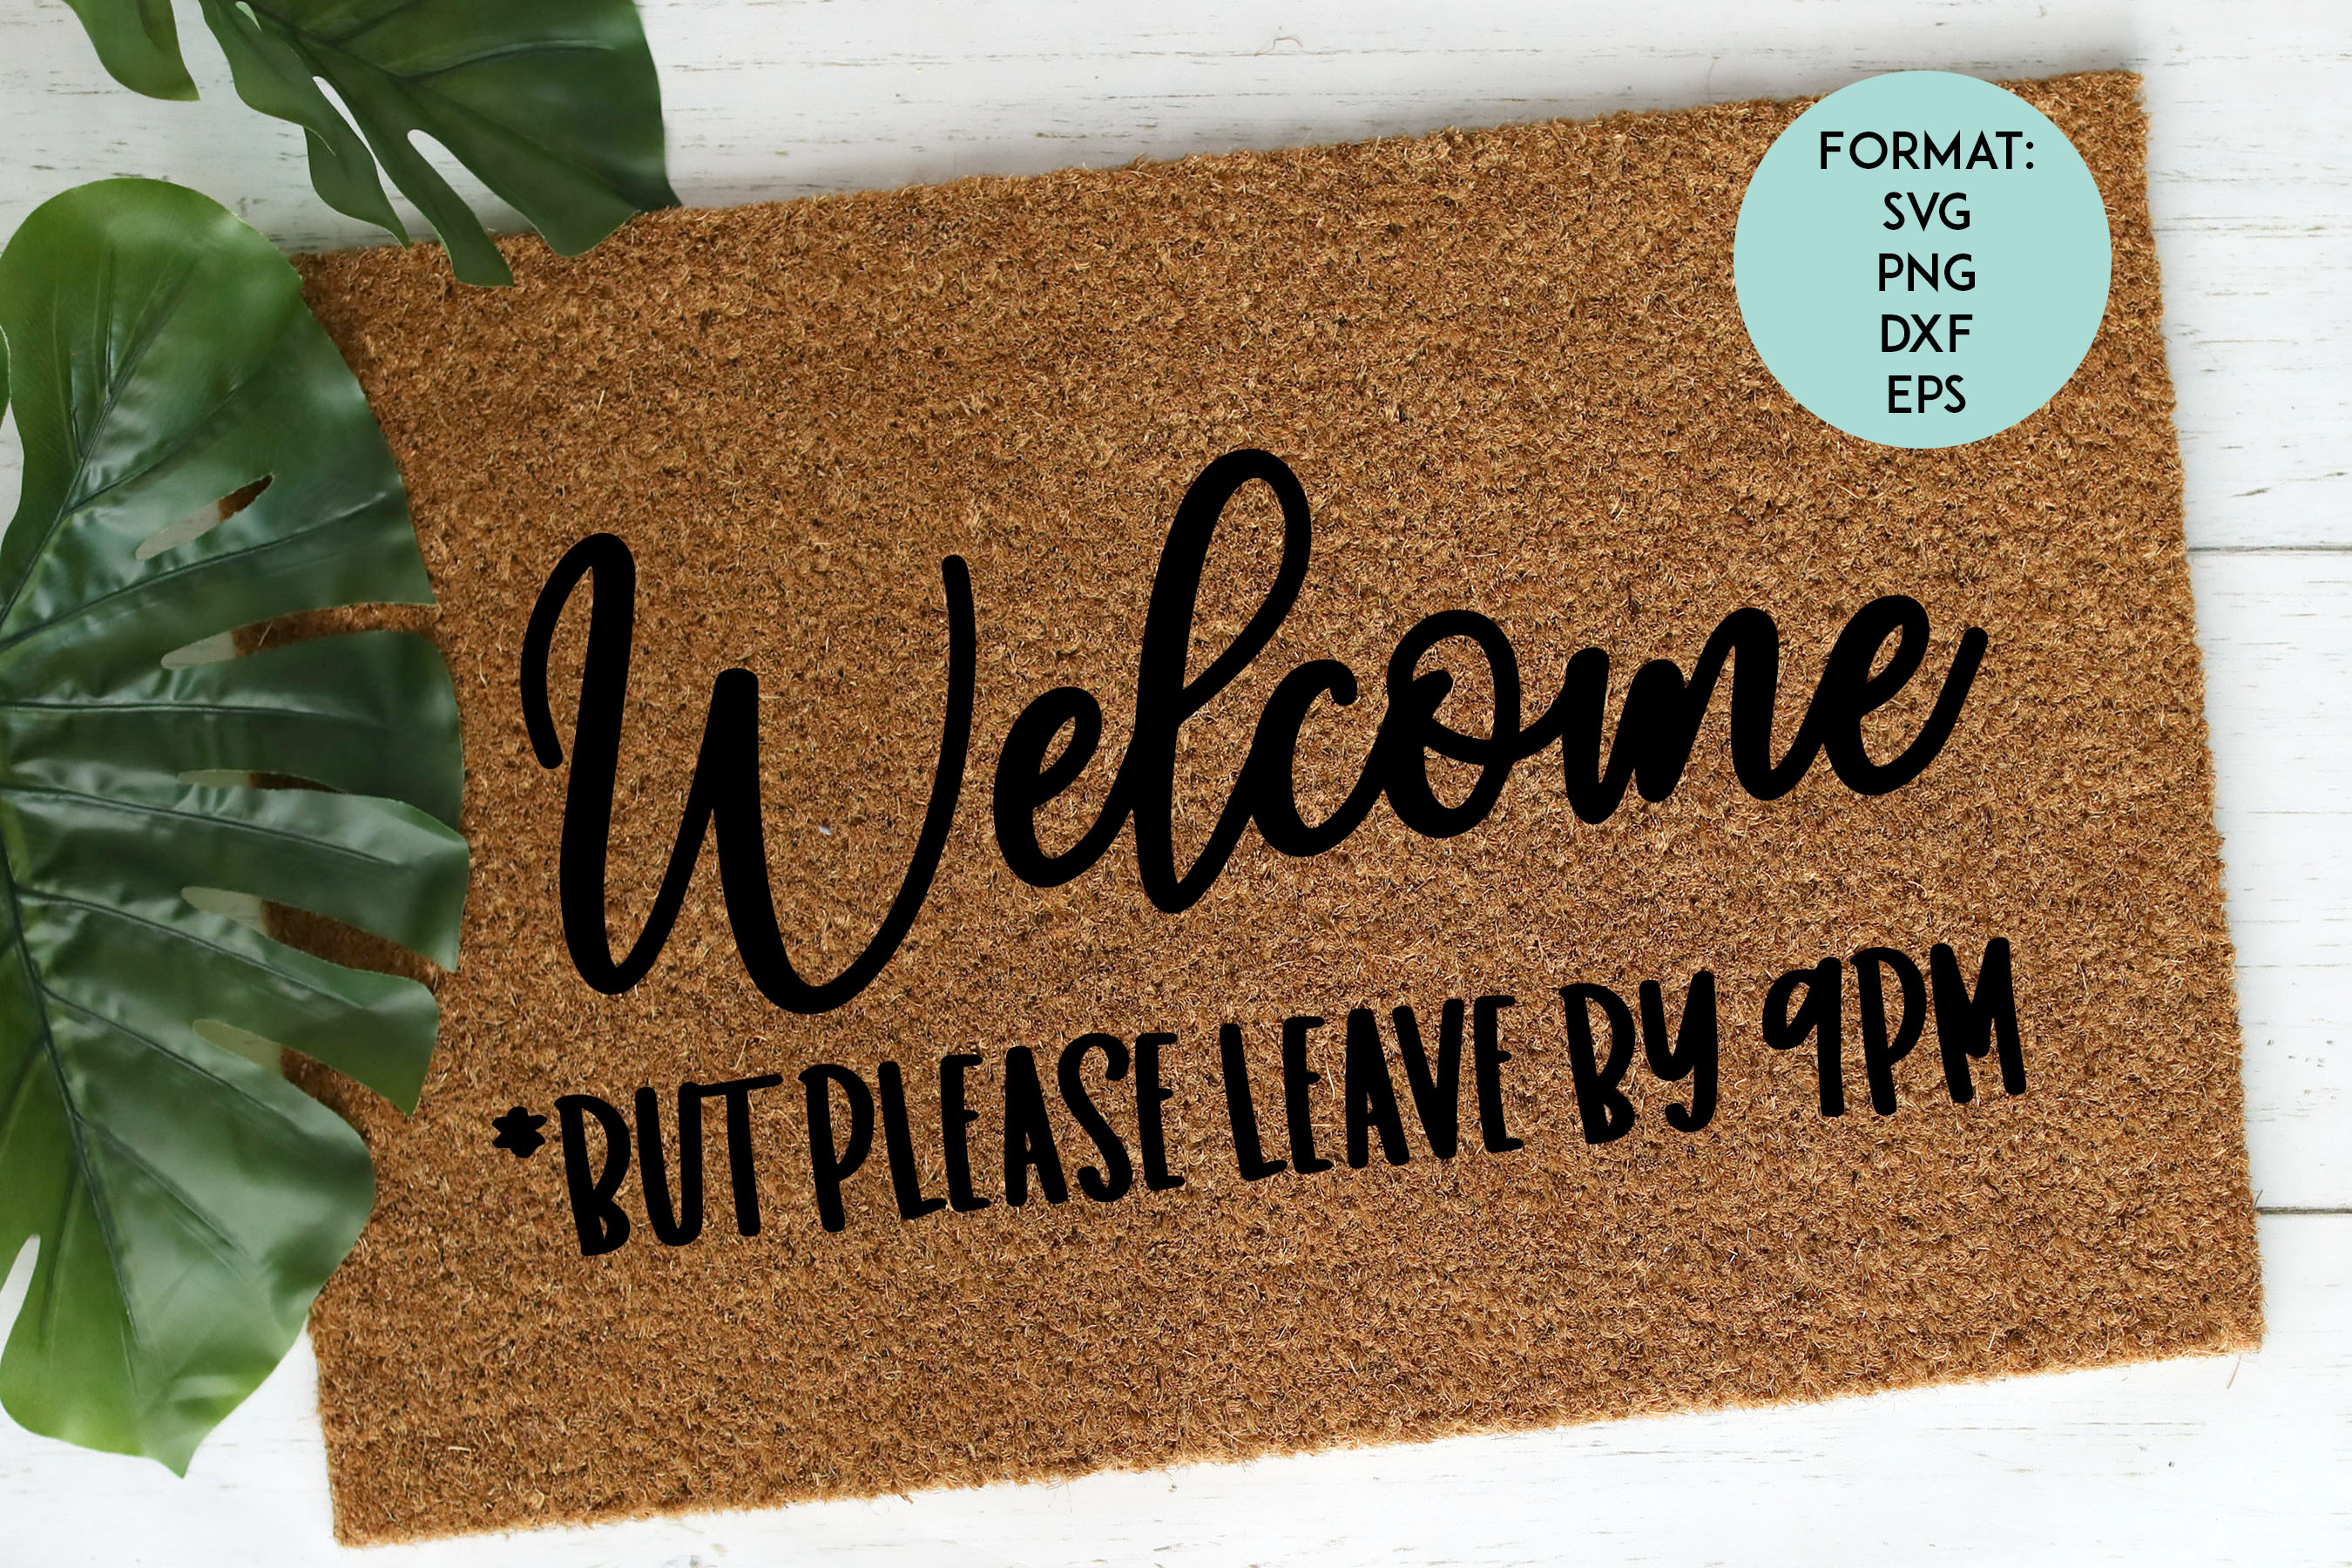 Download Doormat / Welcome But Please Leave By 9 / Funny SVG File